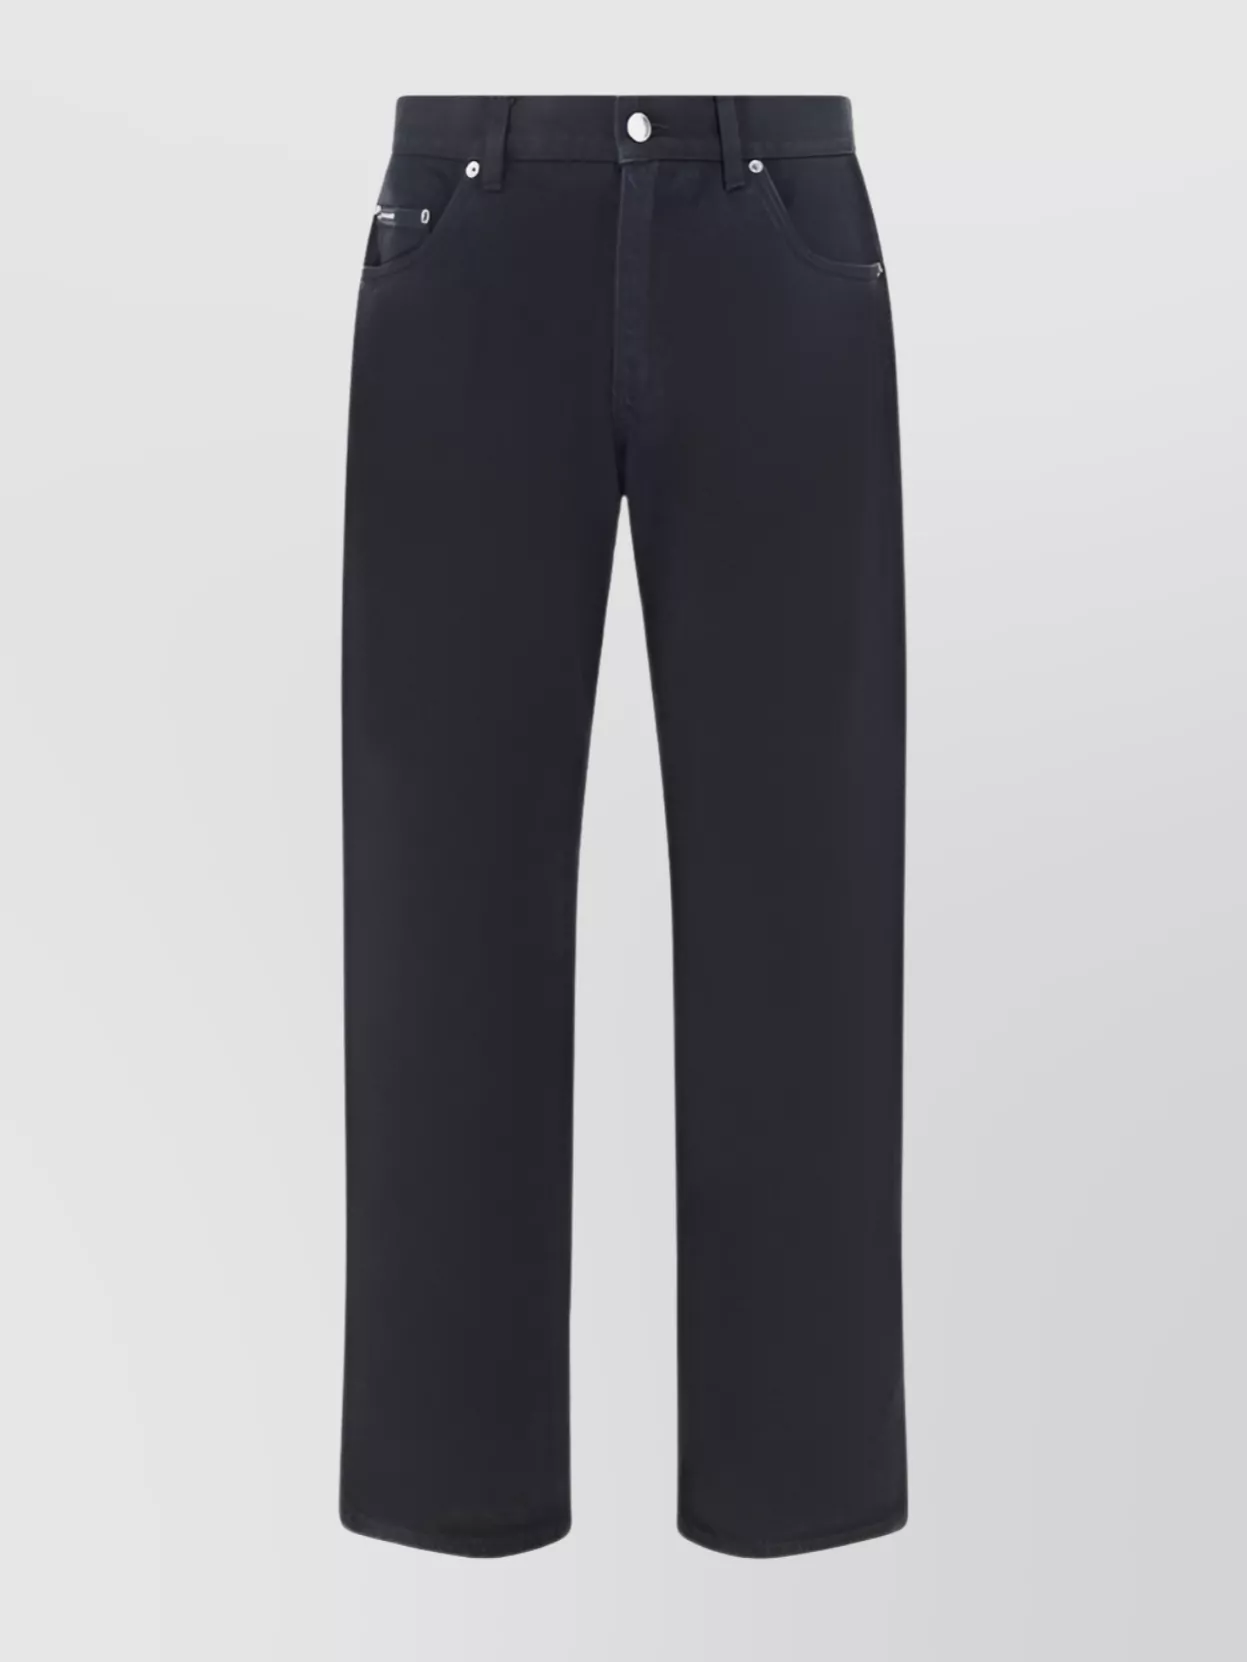 Dolce & Gabbana Straight Leg Cotton Trousers With Metal Hardware In Black